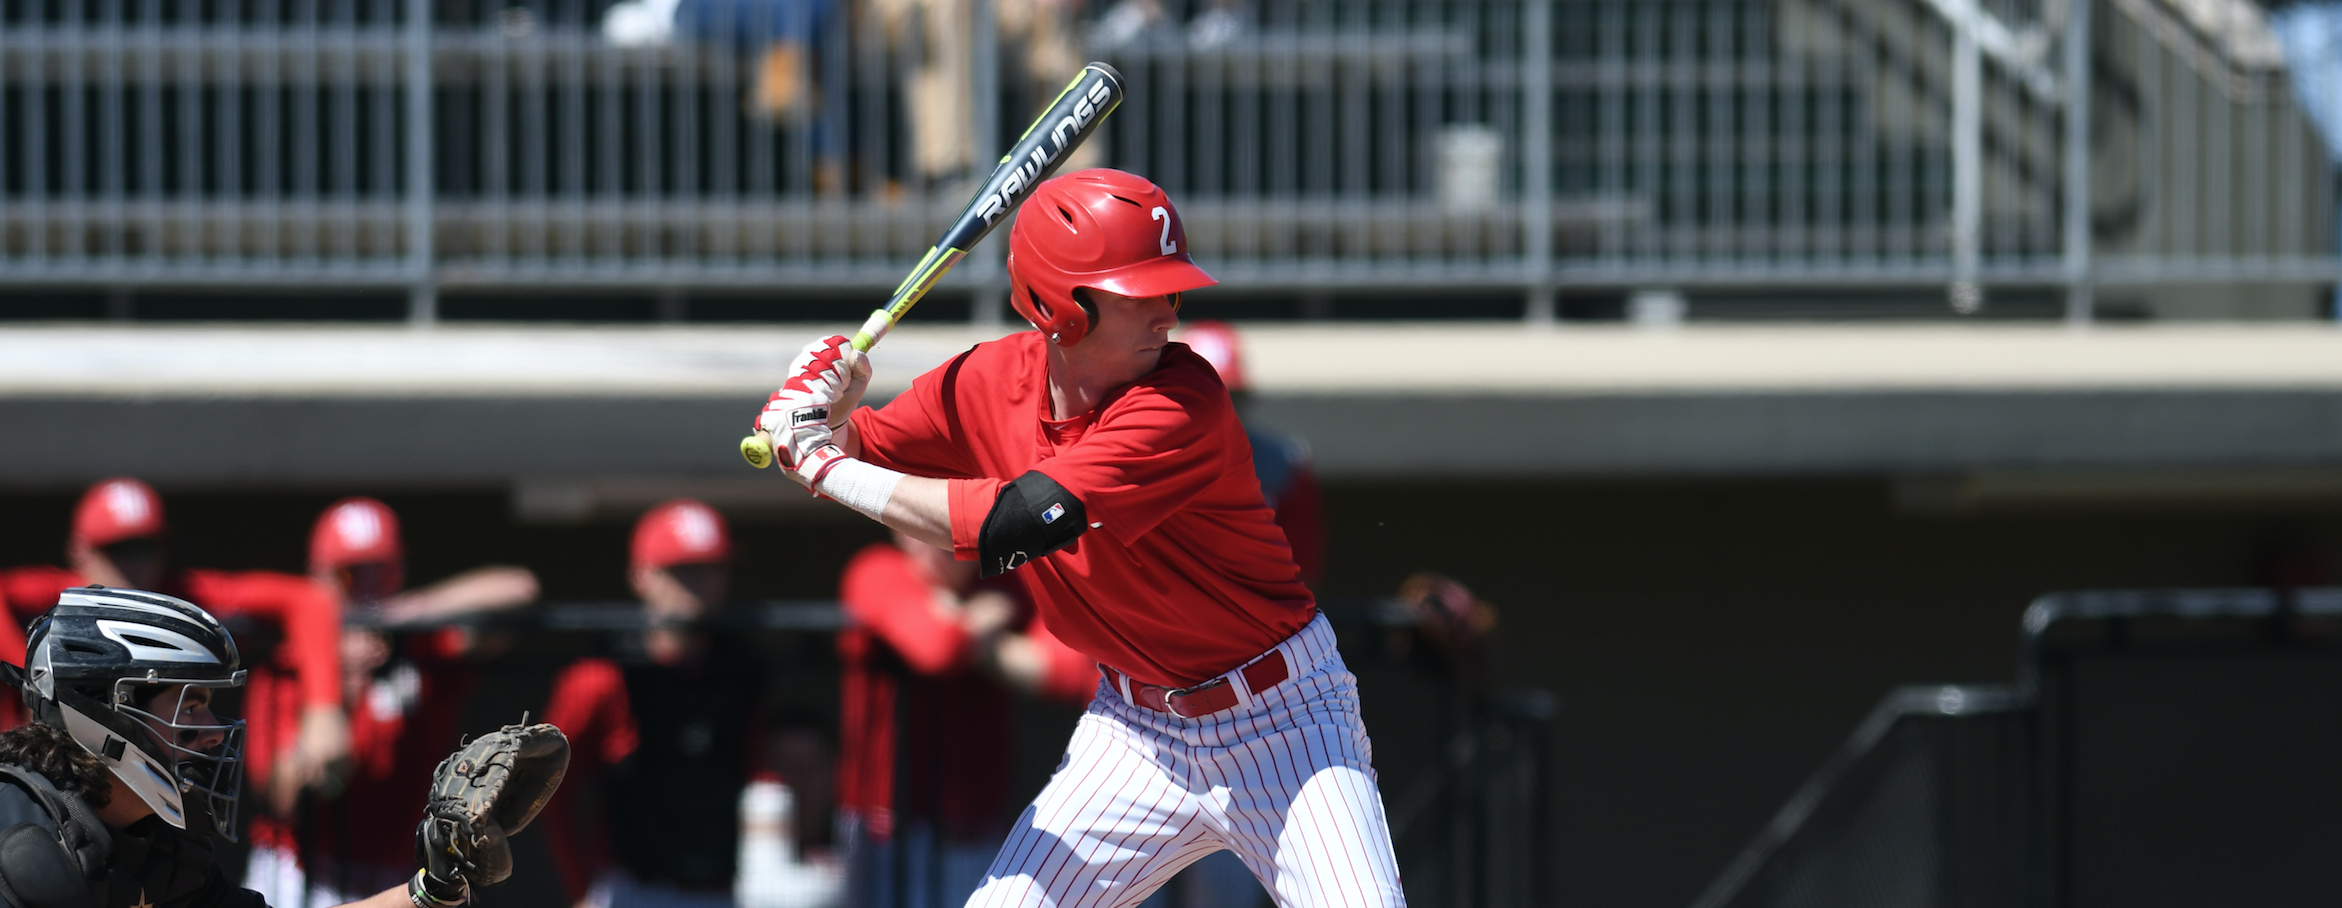 Tigers Split with Big Red on Day One of NCAC Road Weekend